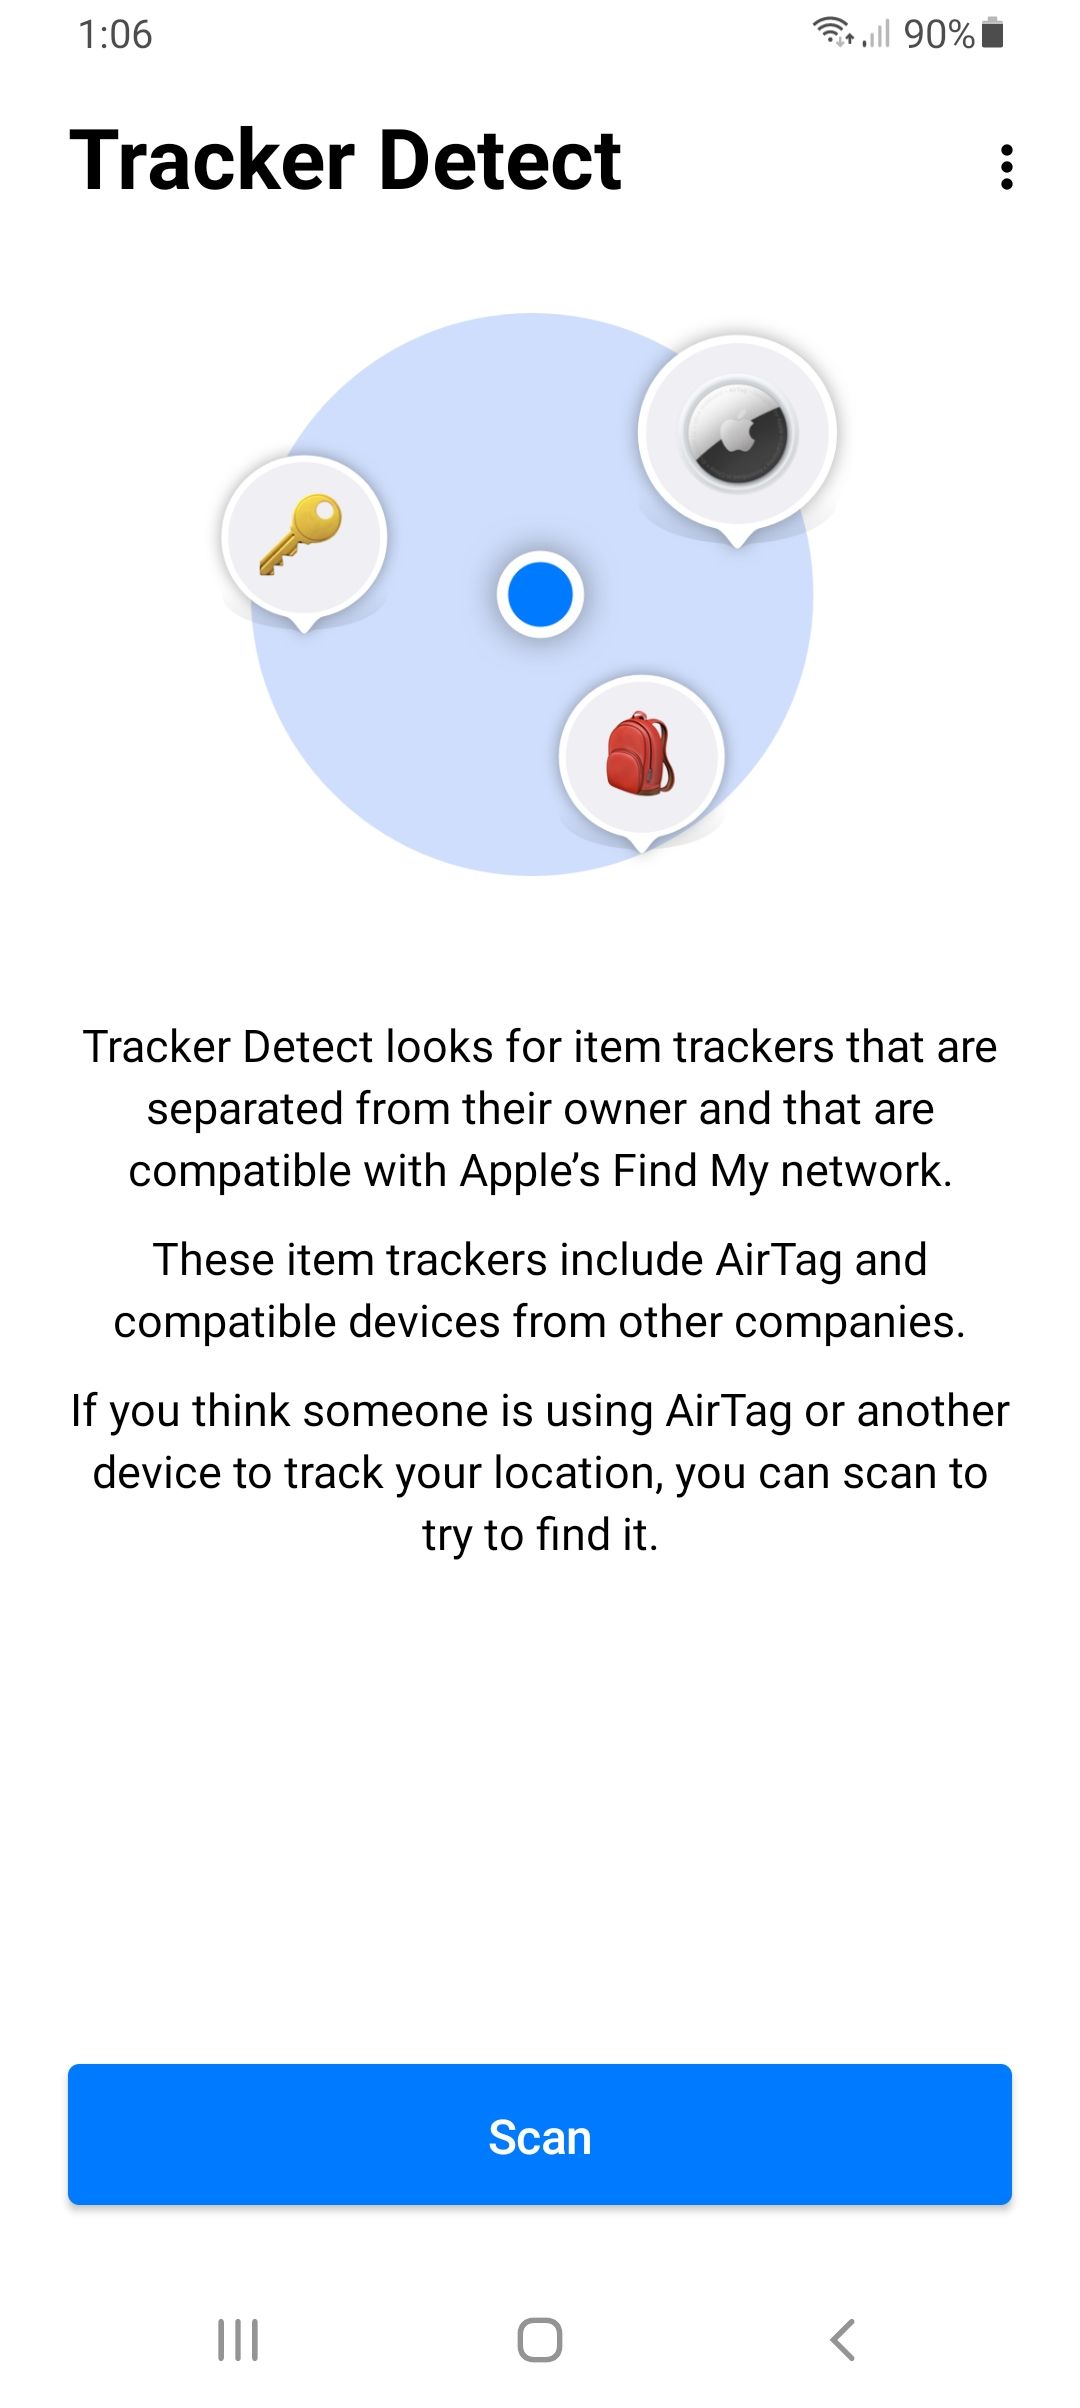 Tracker Detect main window with Scan button.